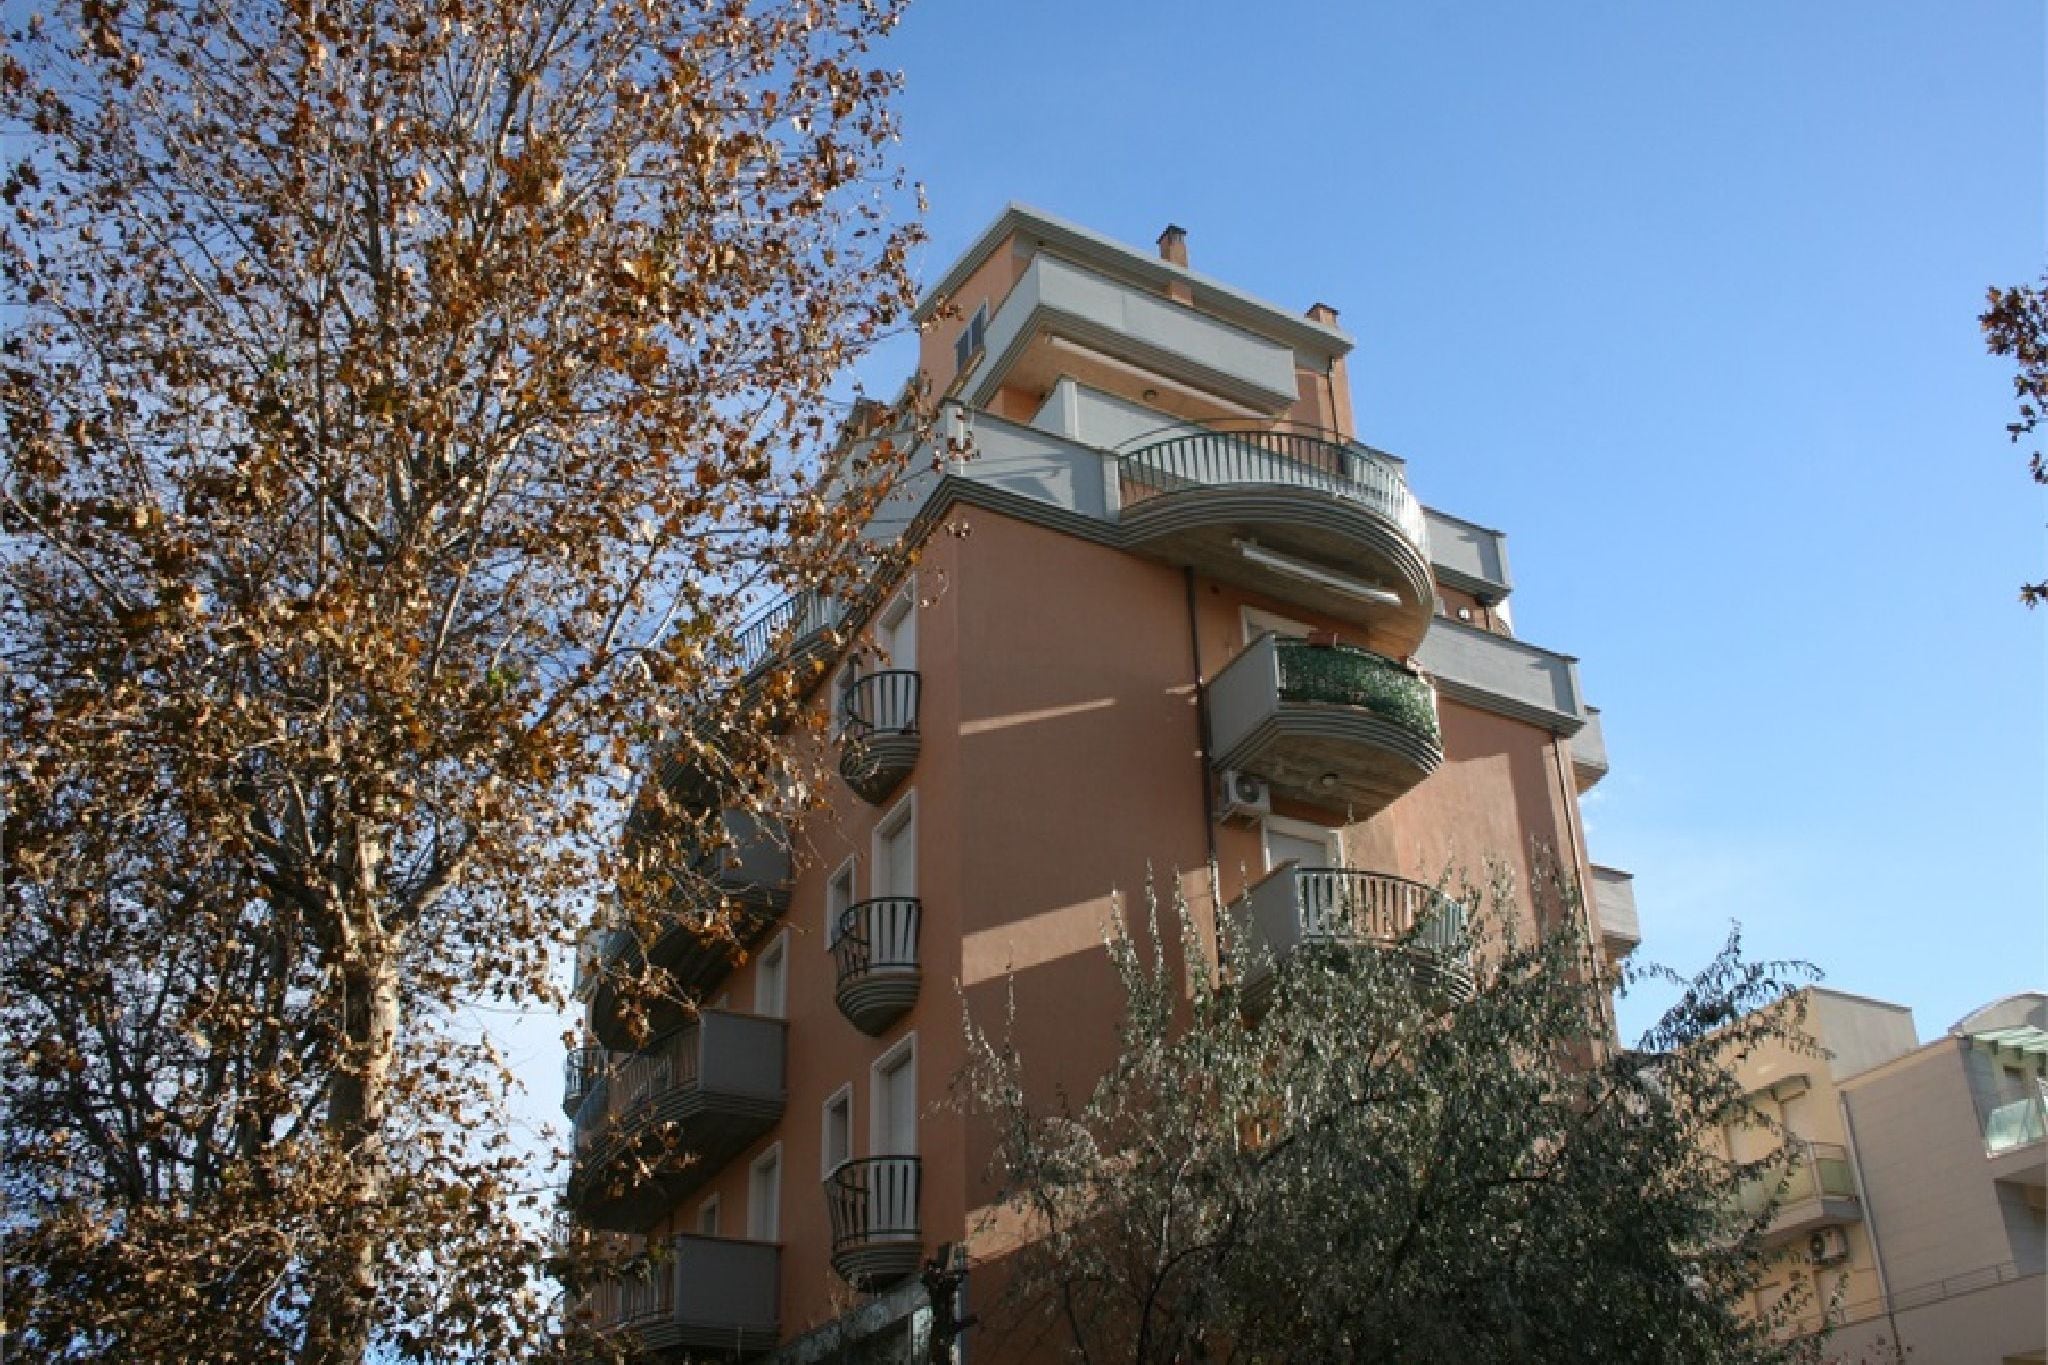 Pleasing Apartment in Riccione Italy with Beach nearby